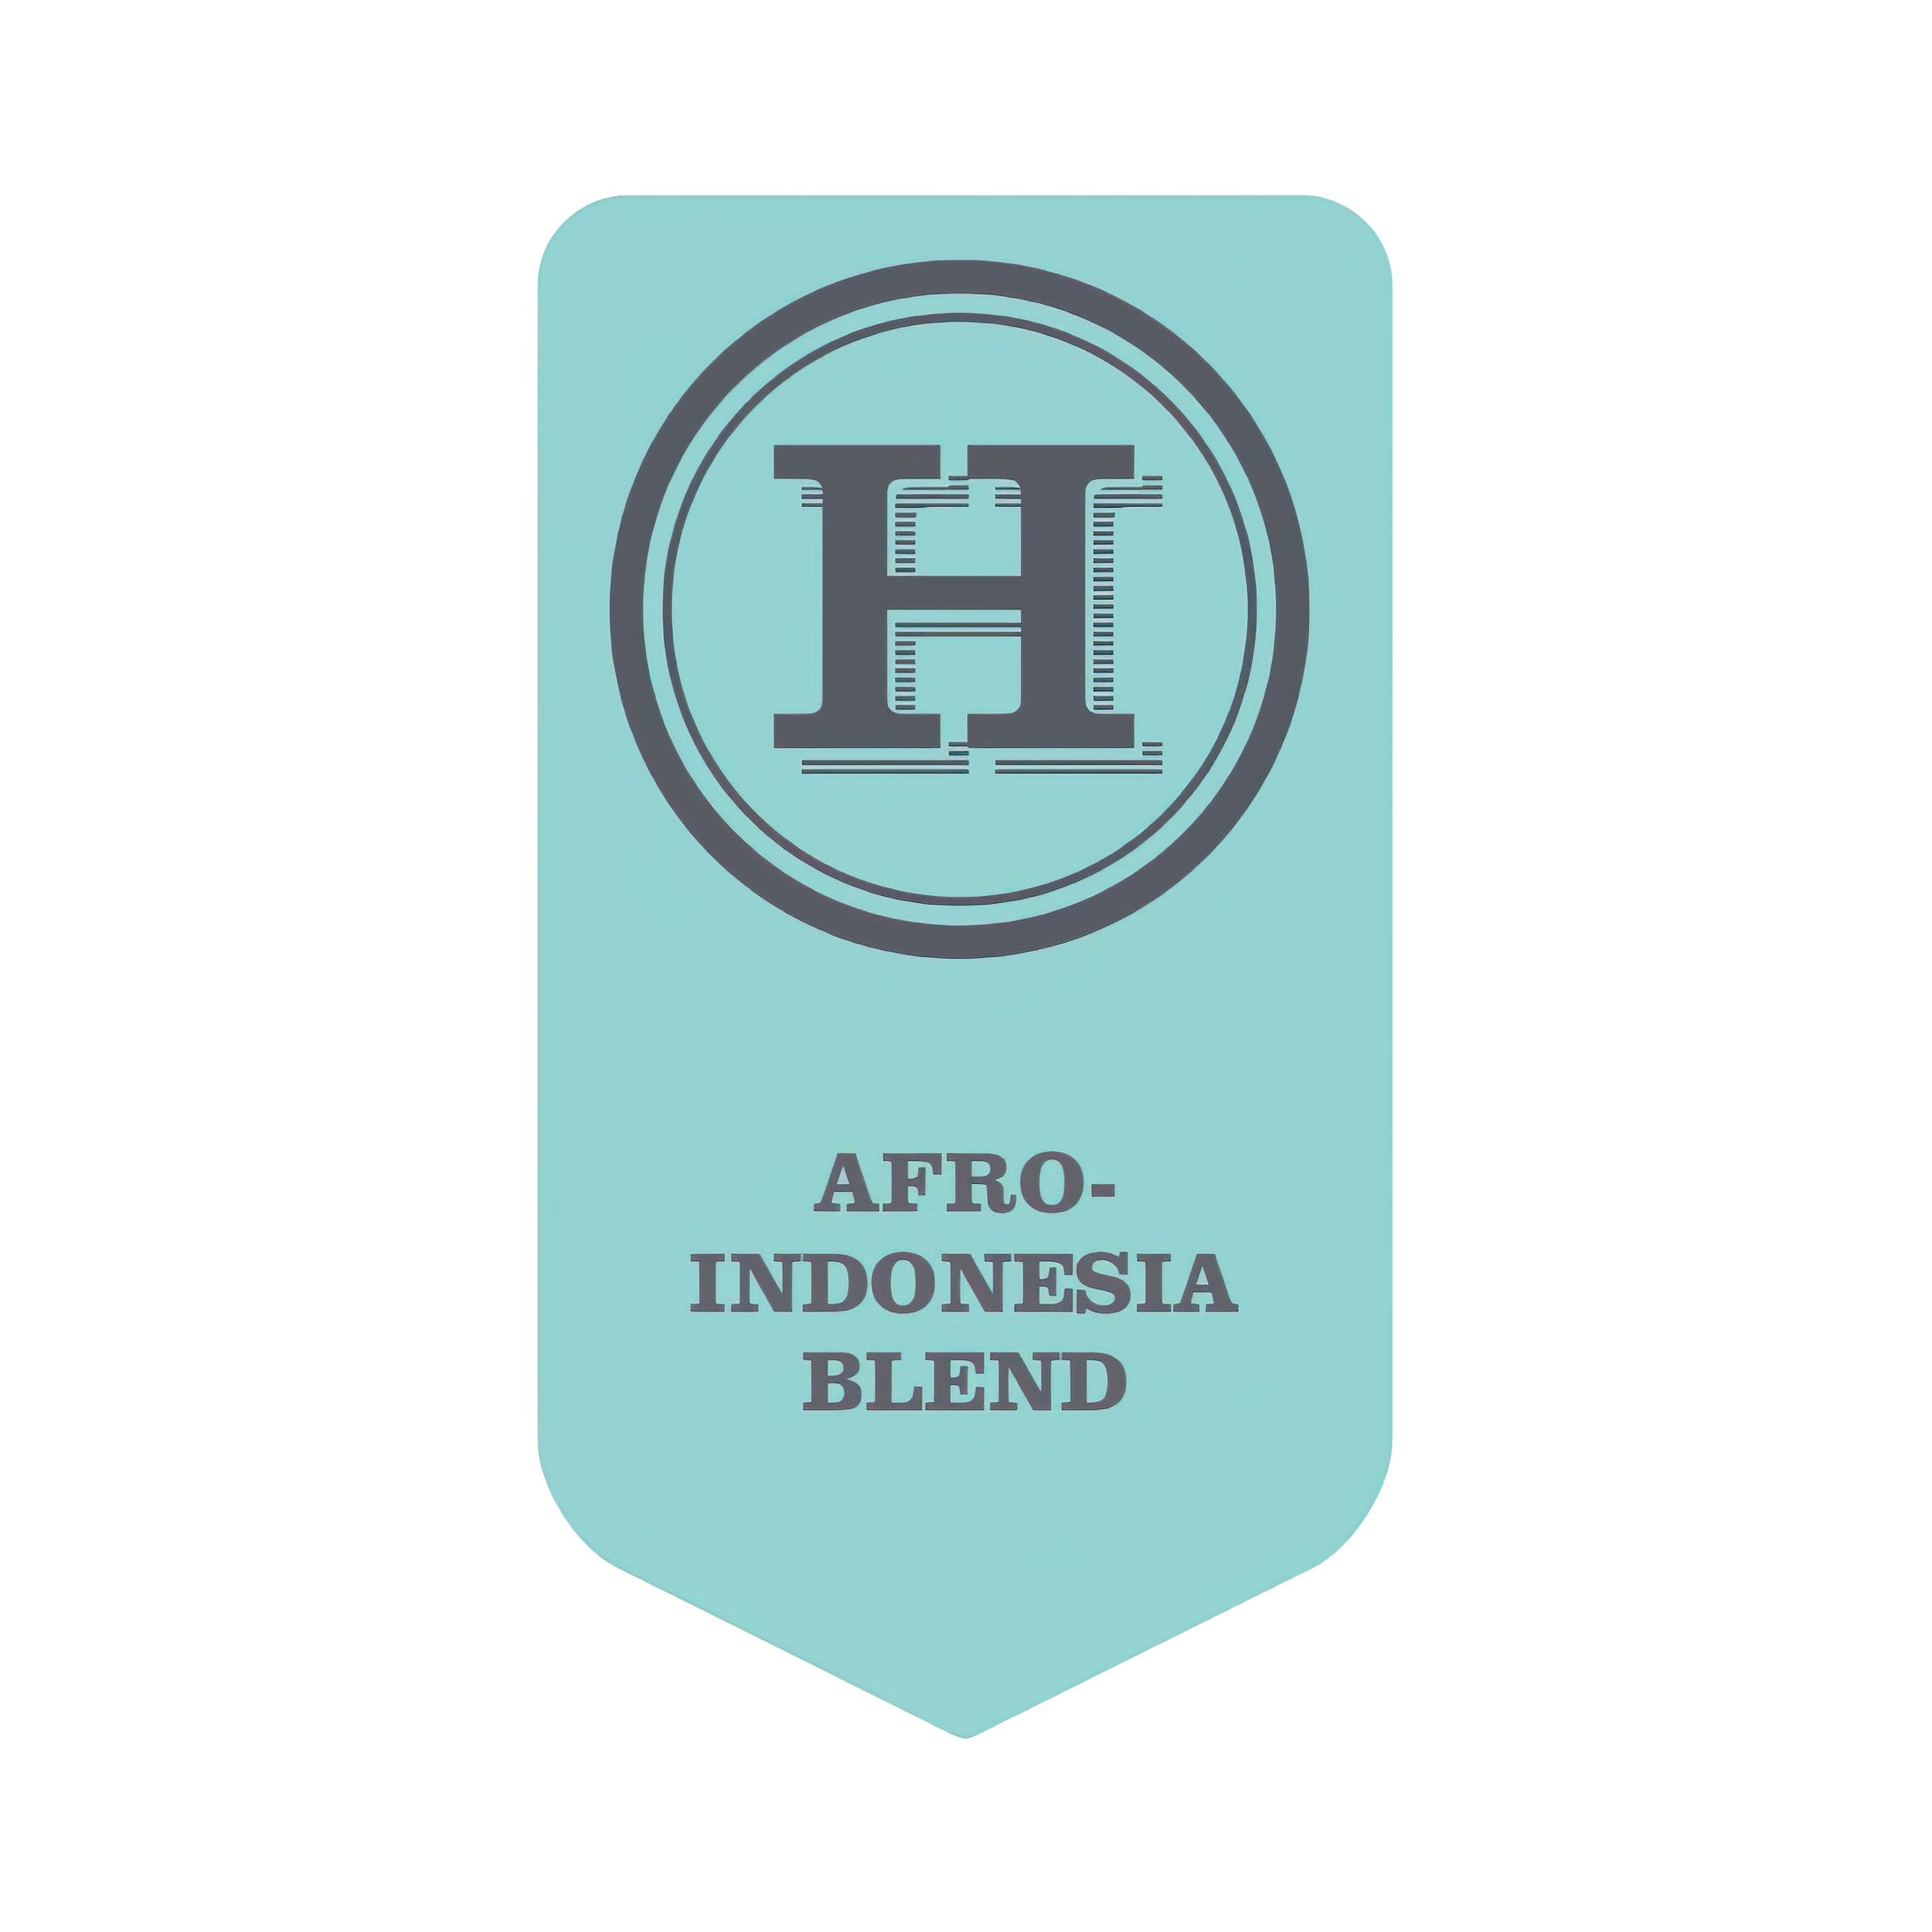 Afro-Indonesia Blend